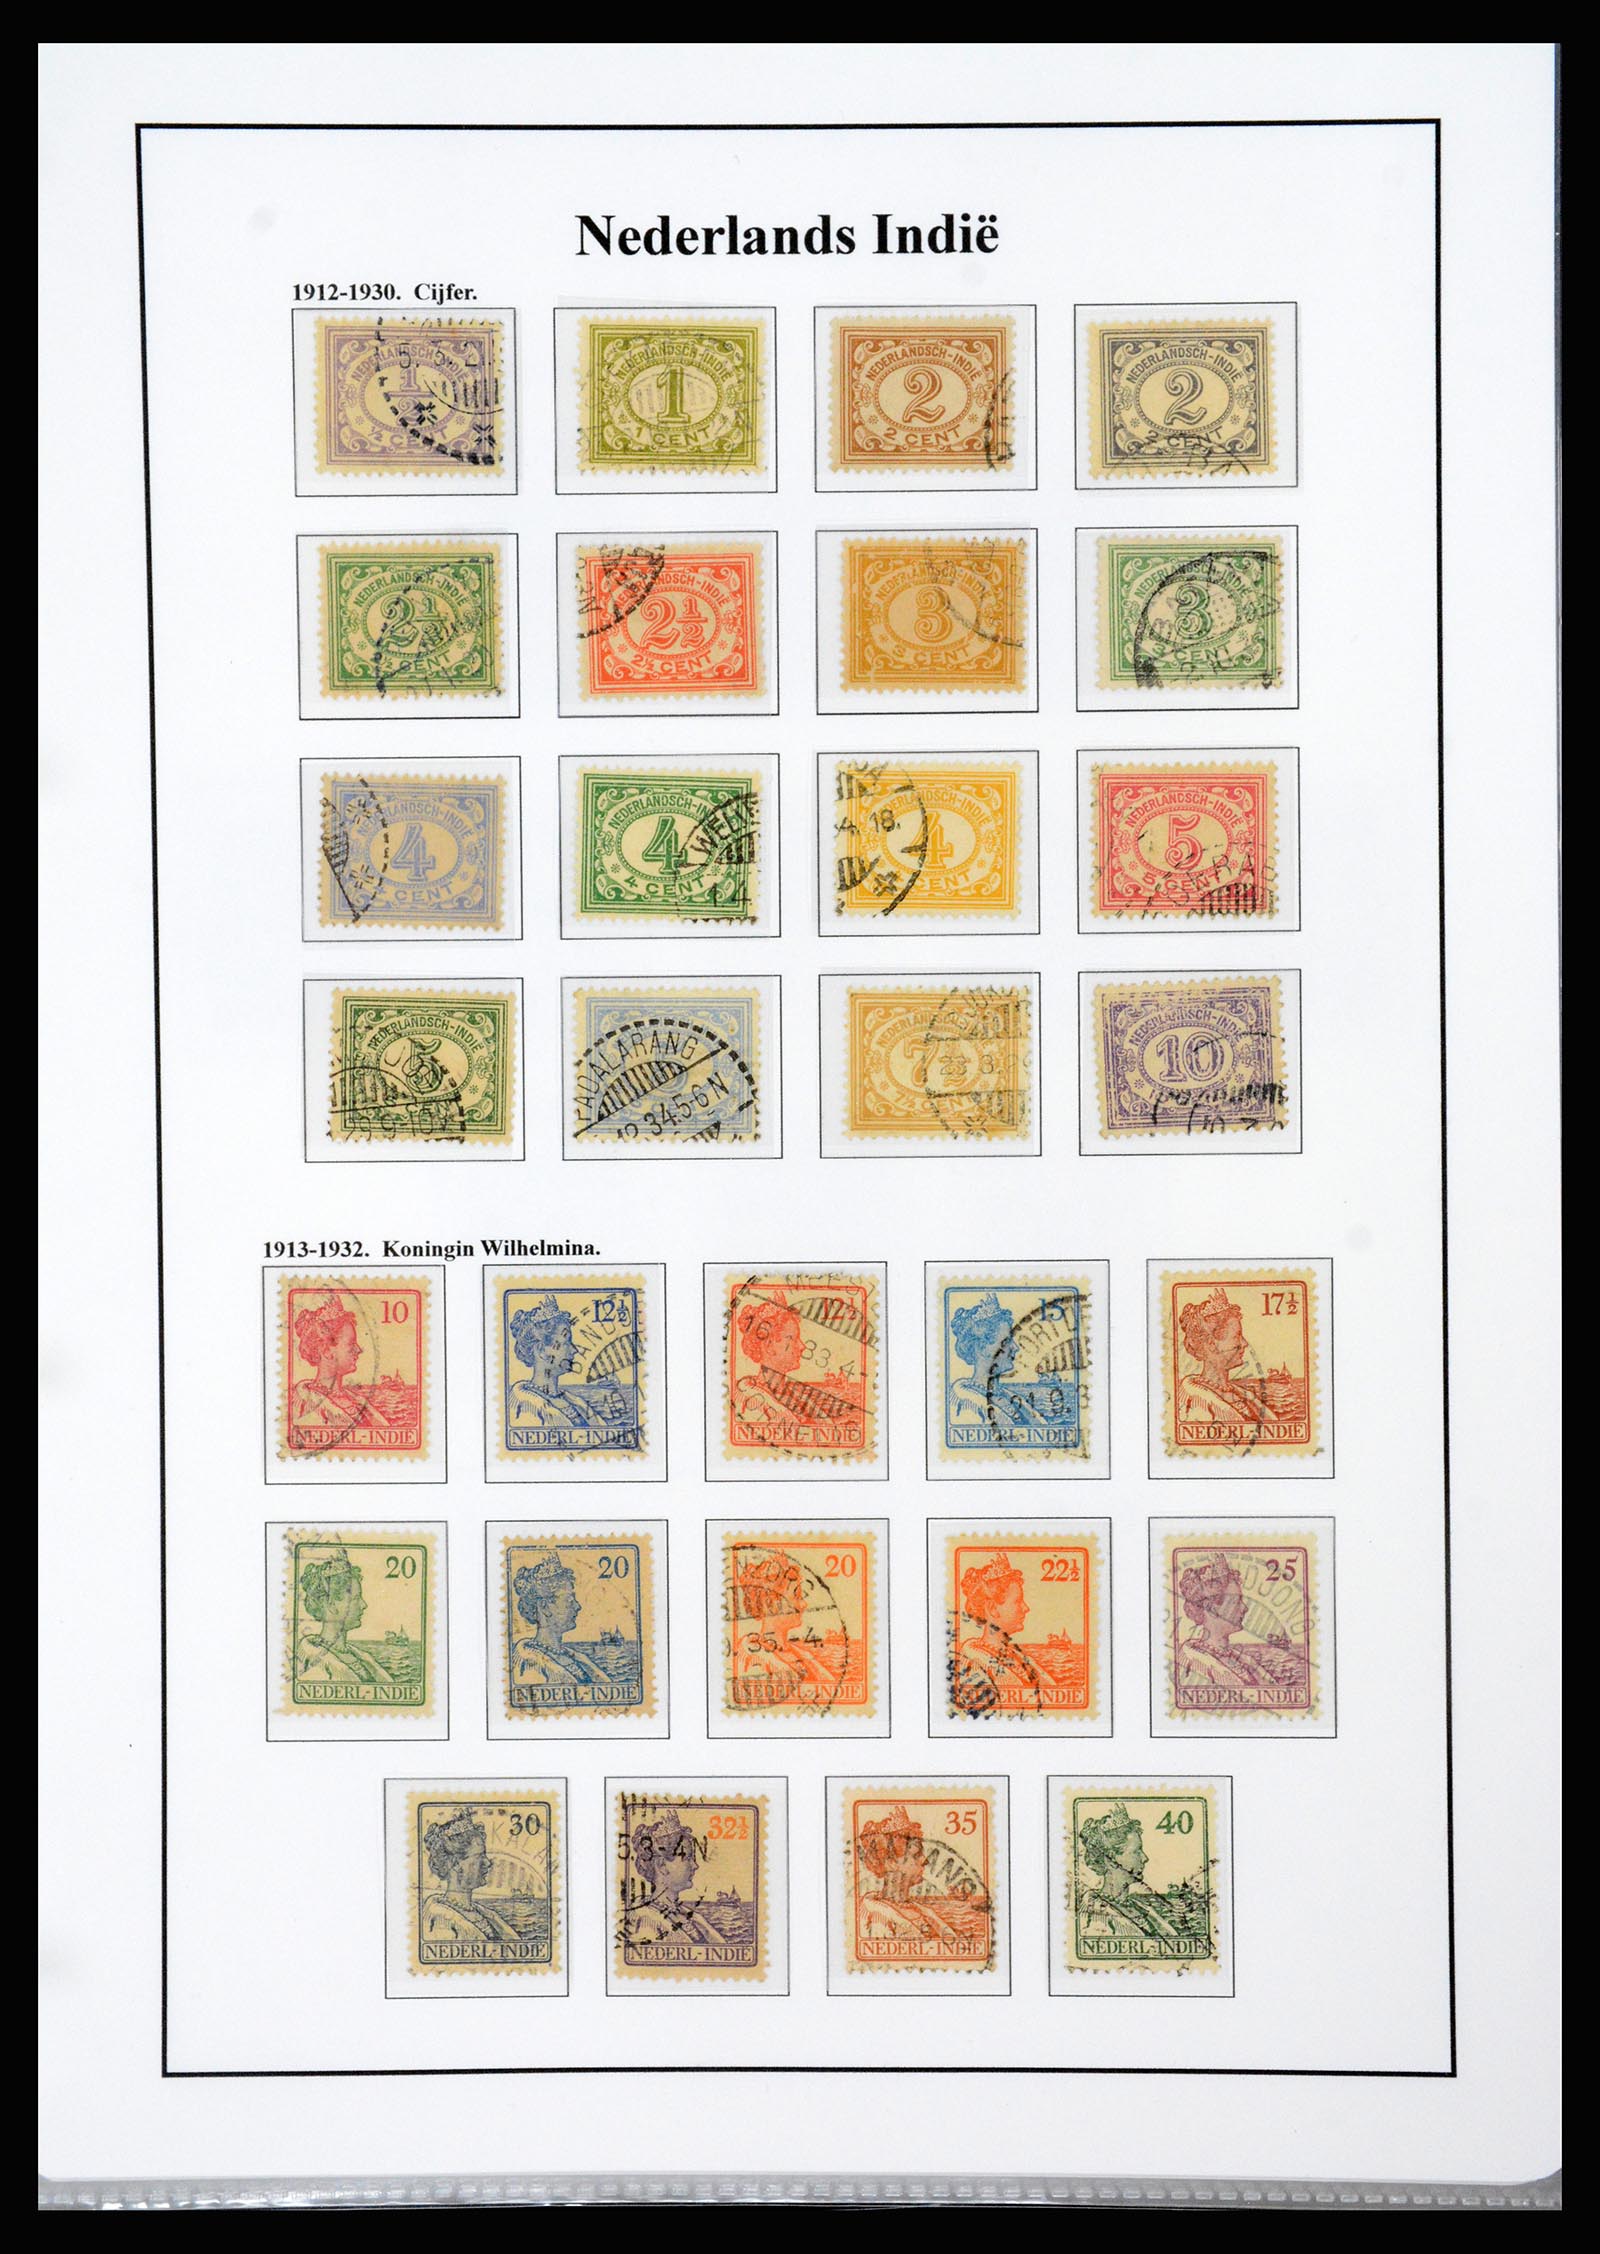 37247 010 - Stamp collection 37247 Dutch east Indies 1864-1949.